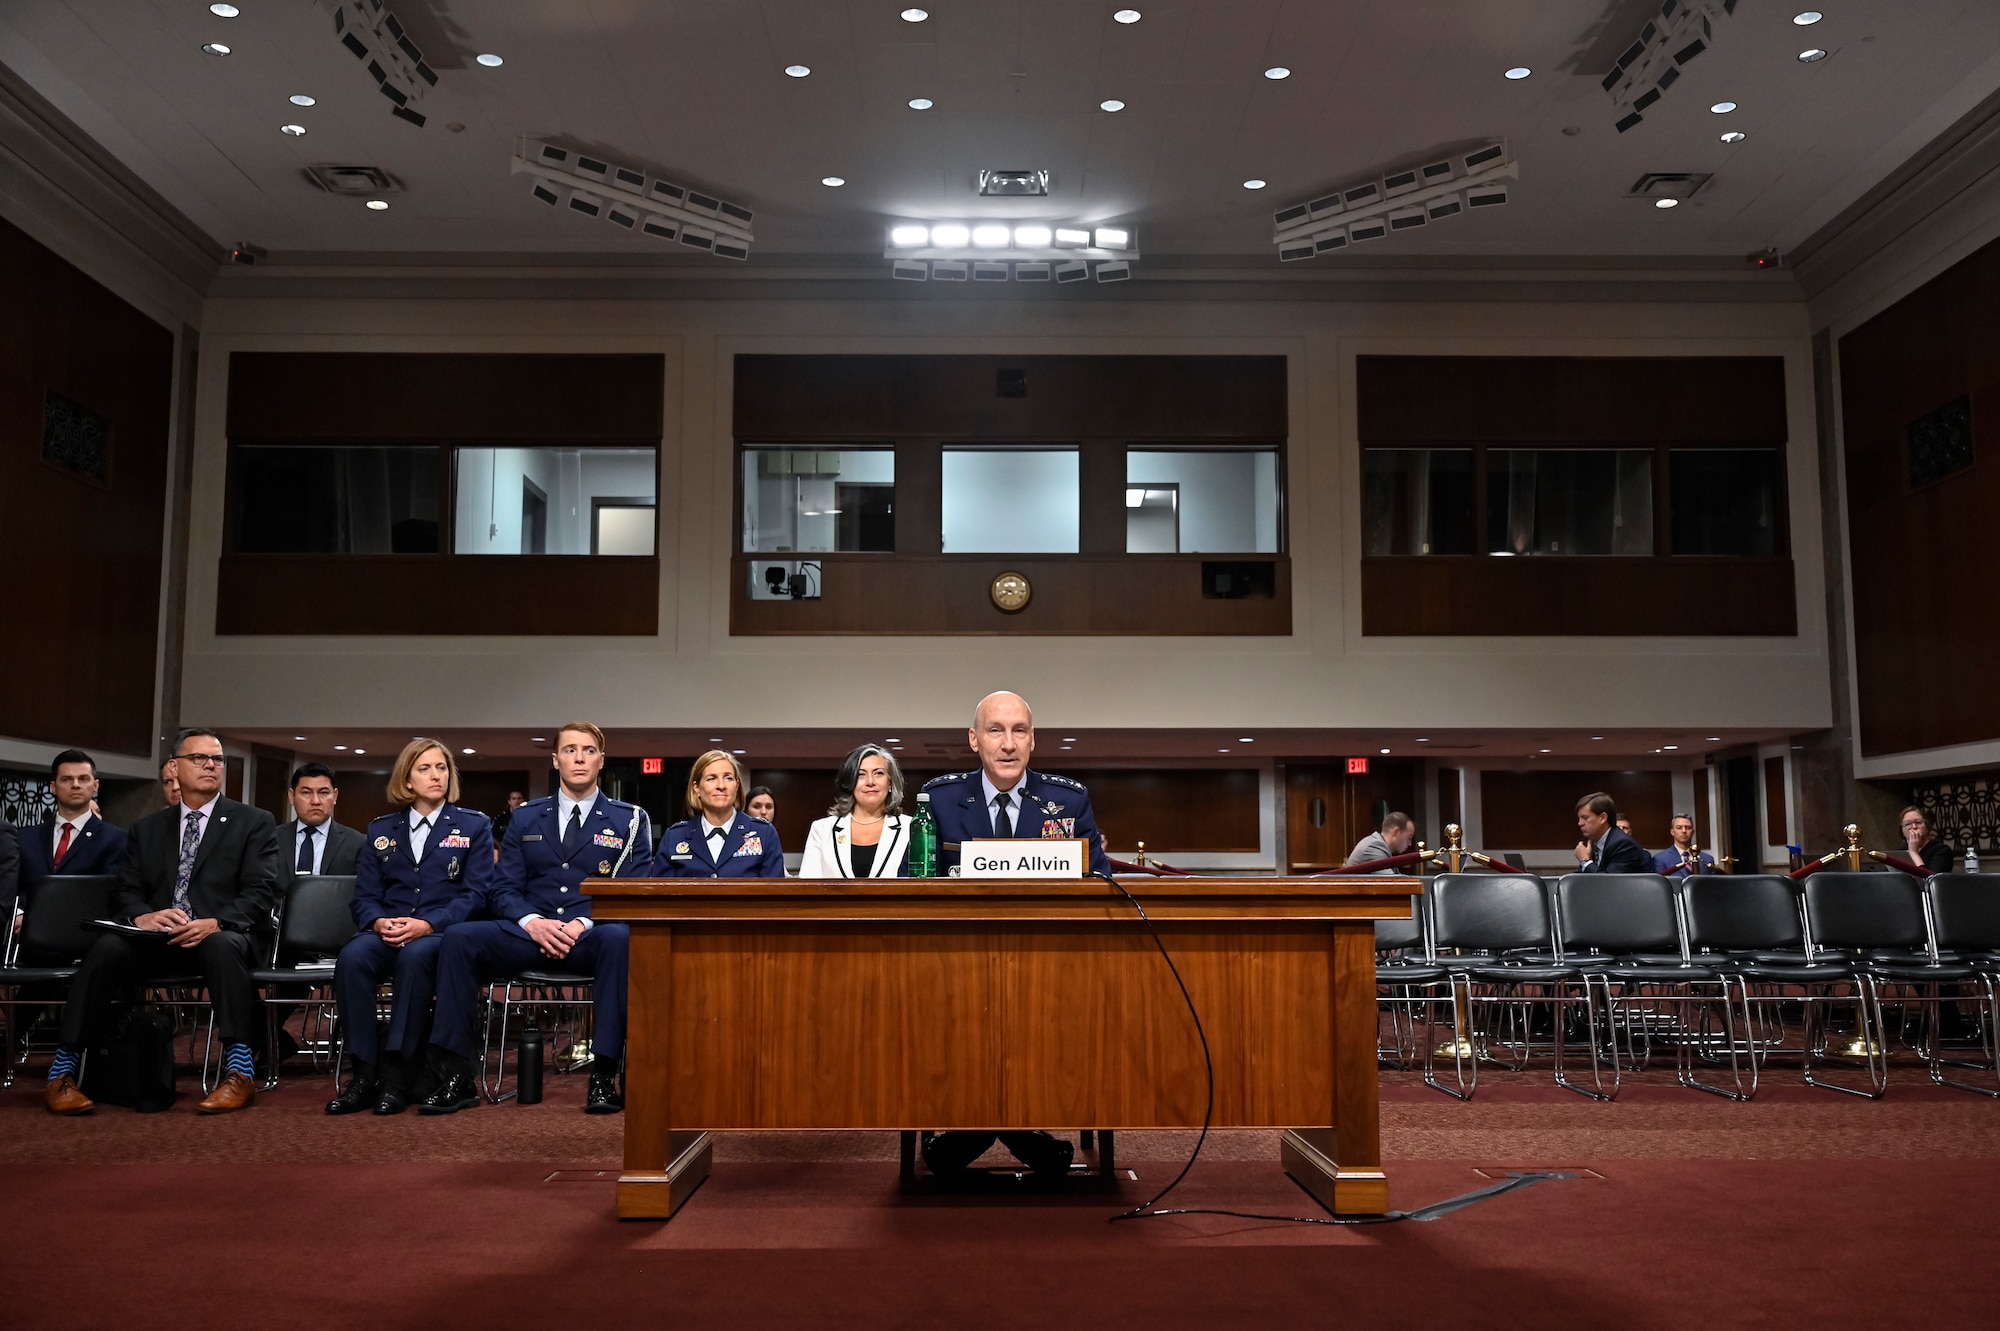 Air Force Vice Chief of Staff Gen. David W. Allvin testifies before the Senate Armed Services Committee on Capitol Hill for his nomination to be the next Air Force chief of staff, in Washington, D.C., Sept. 12, 2023. (U.S. Air Force photo by Eric Dietrich)